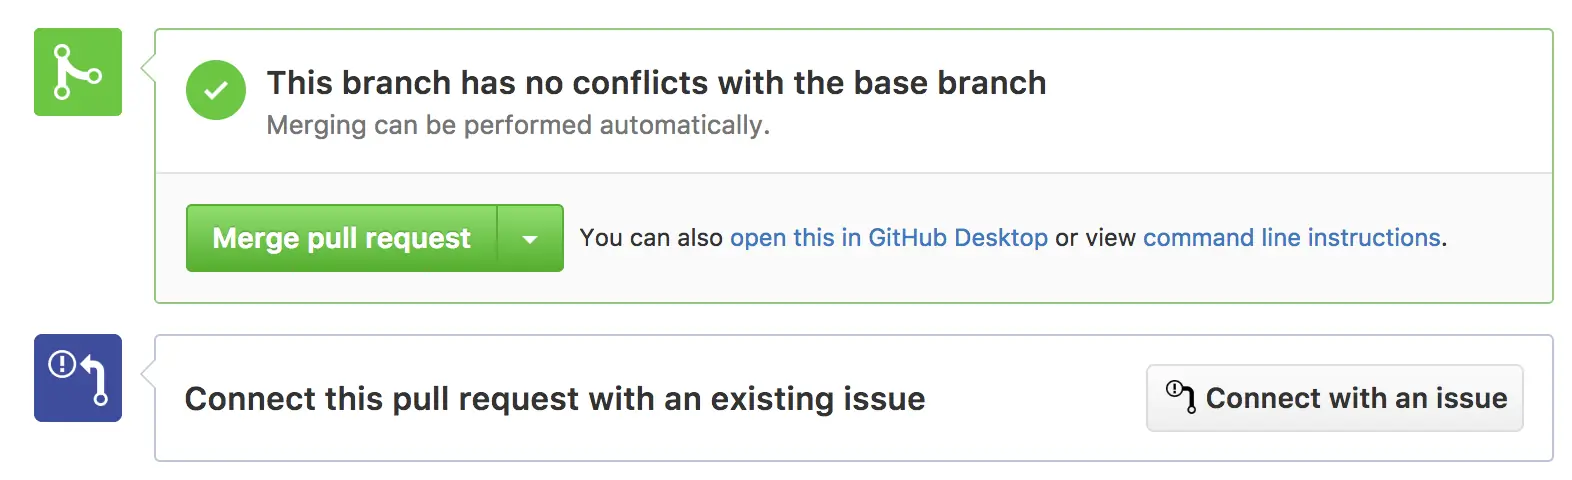 tracking pull requests and GitHub issues